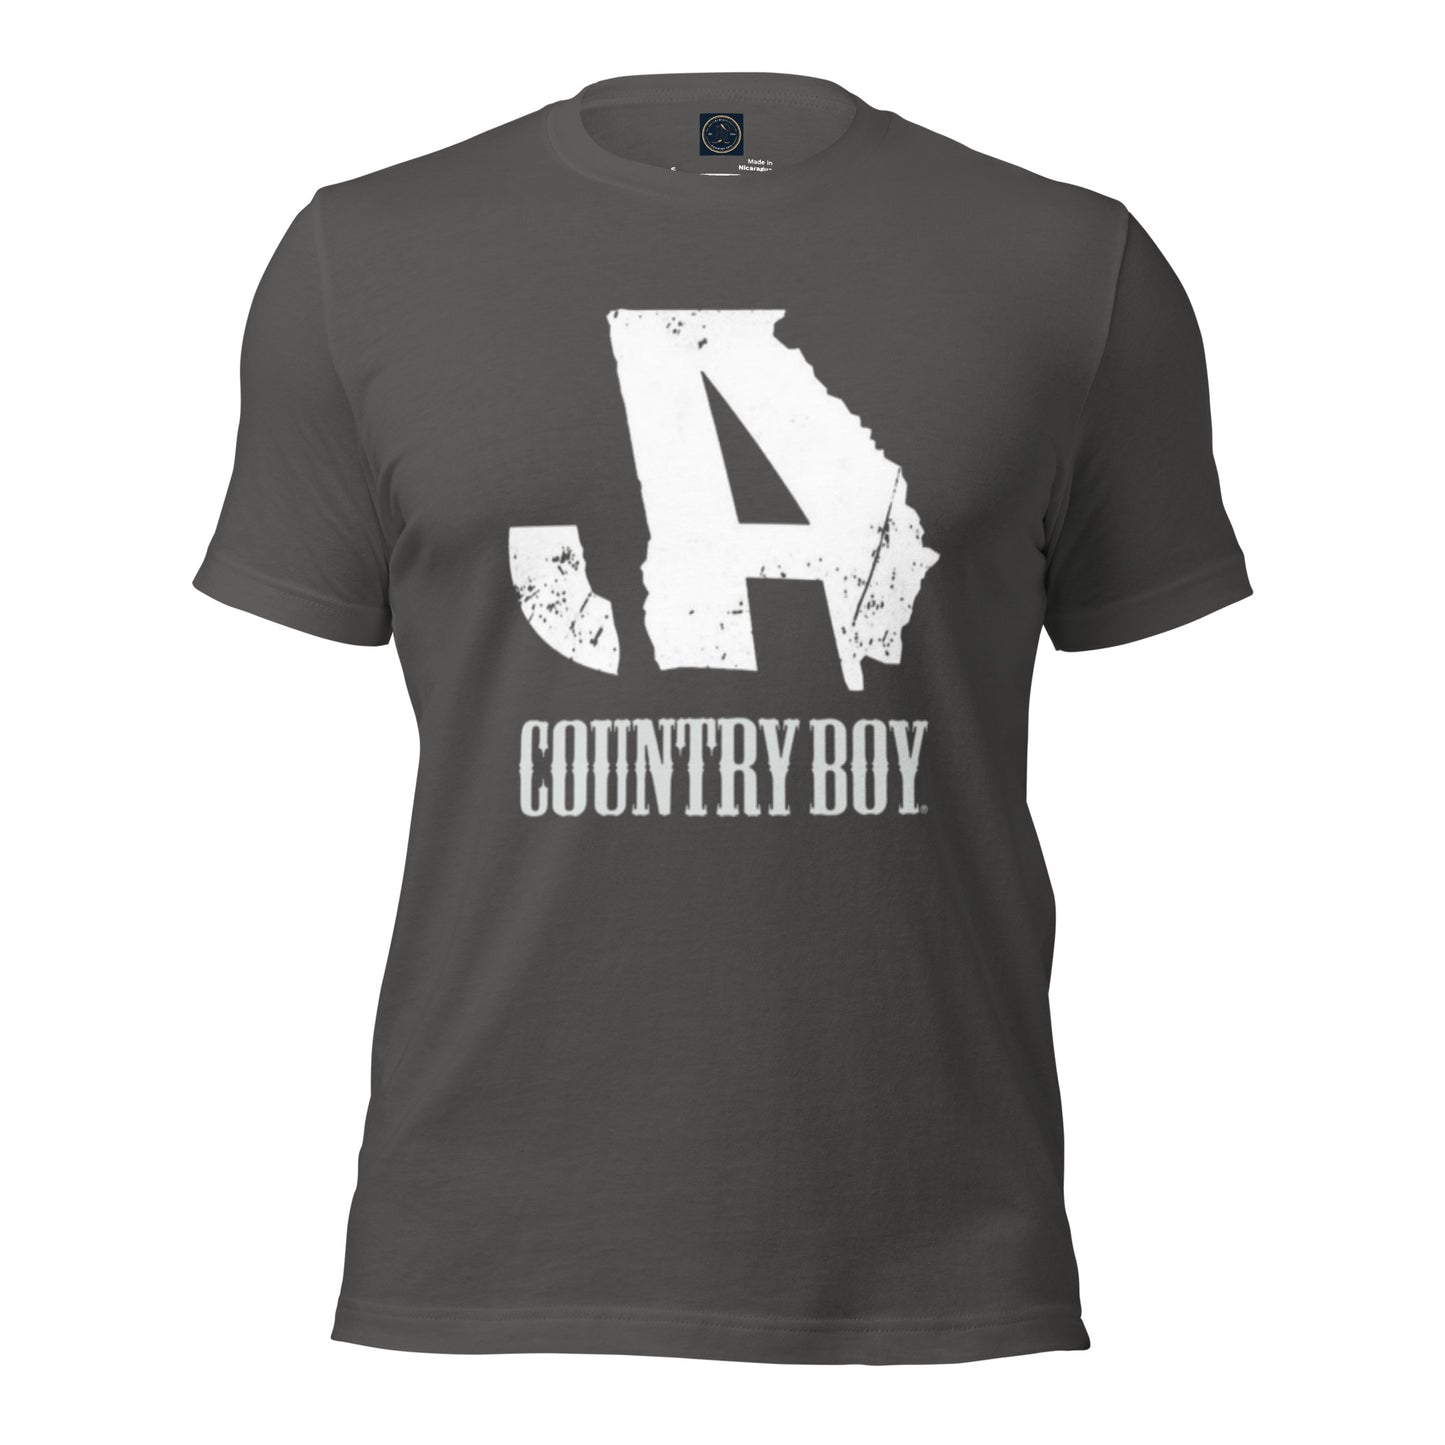 Country Boy - Get Your Twang On with Classic Country Tees - The Ultimate Unisex T-Shirt for True Country Souls! - Classic Country Tees